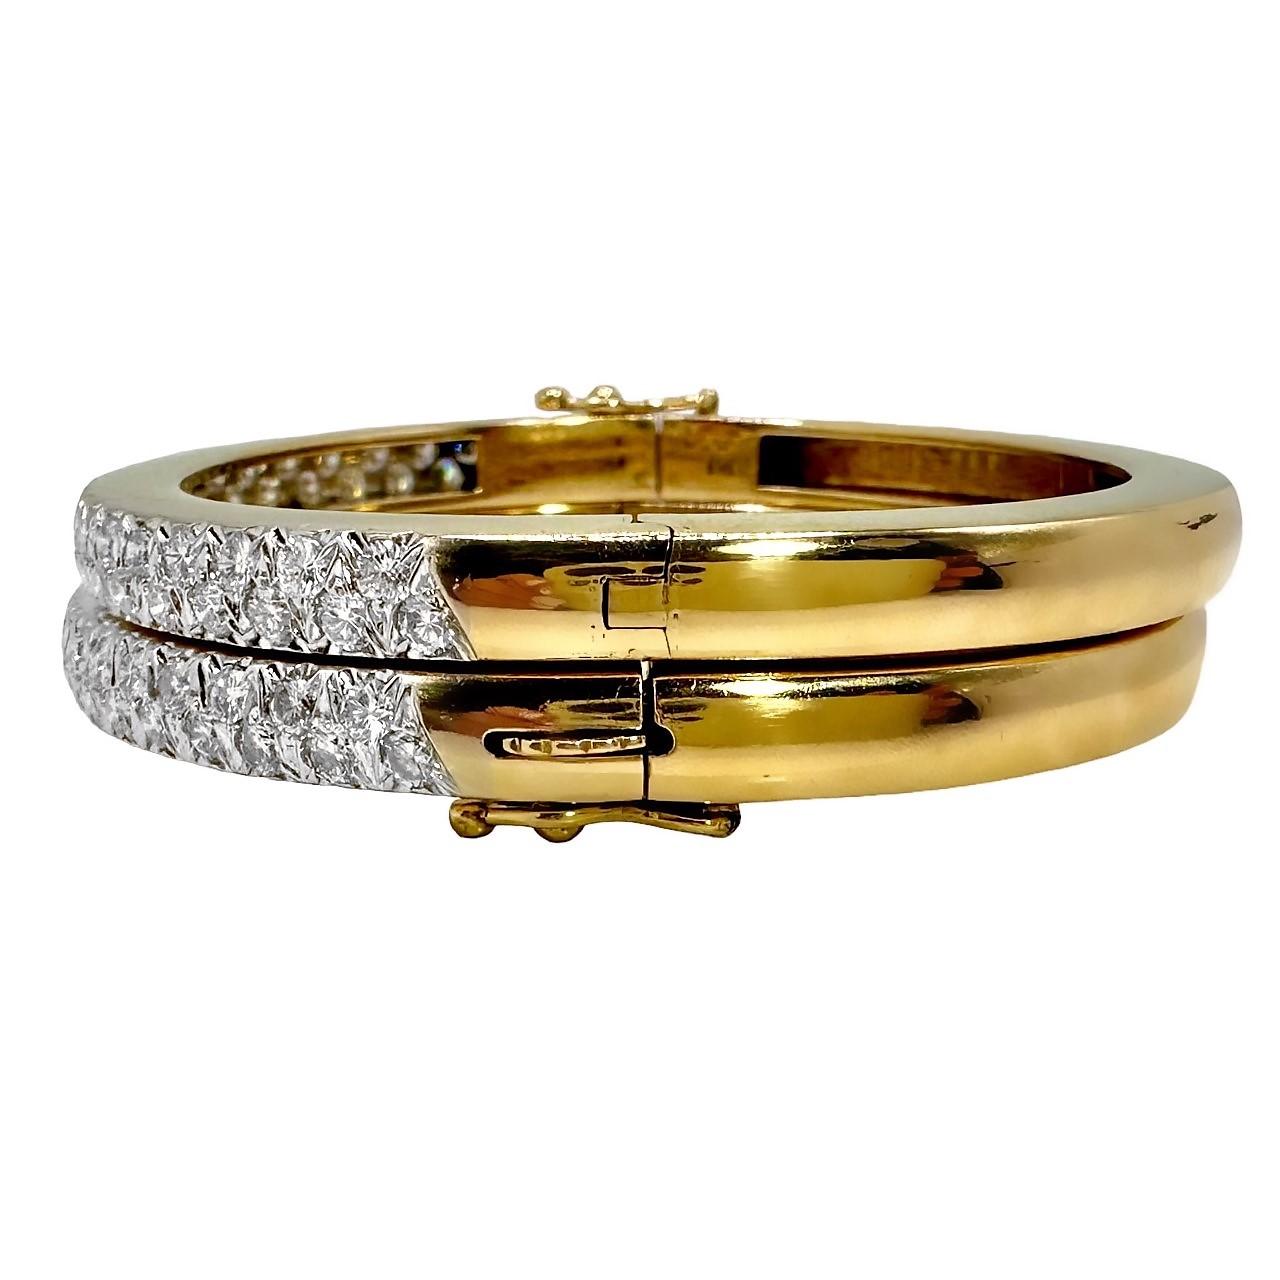 Pair of 14k Yellow Gold Oval Bangles with Pave Diamonds on across the Top In Good Condition For Sale In Palm Beach, FL